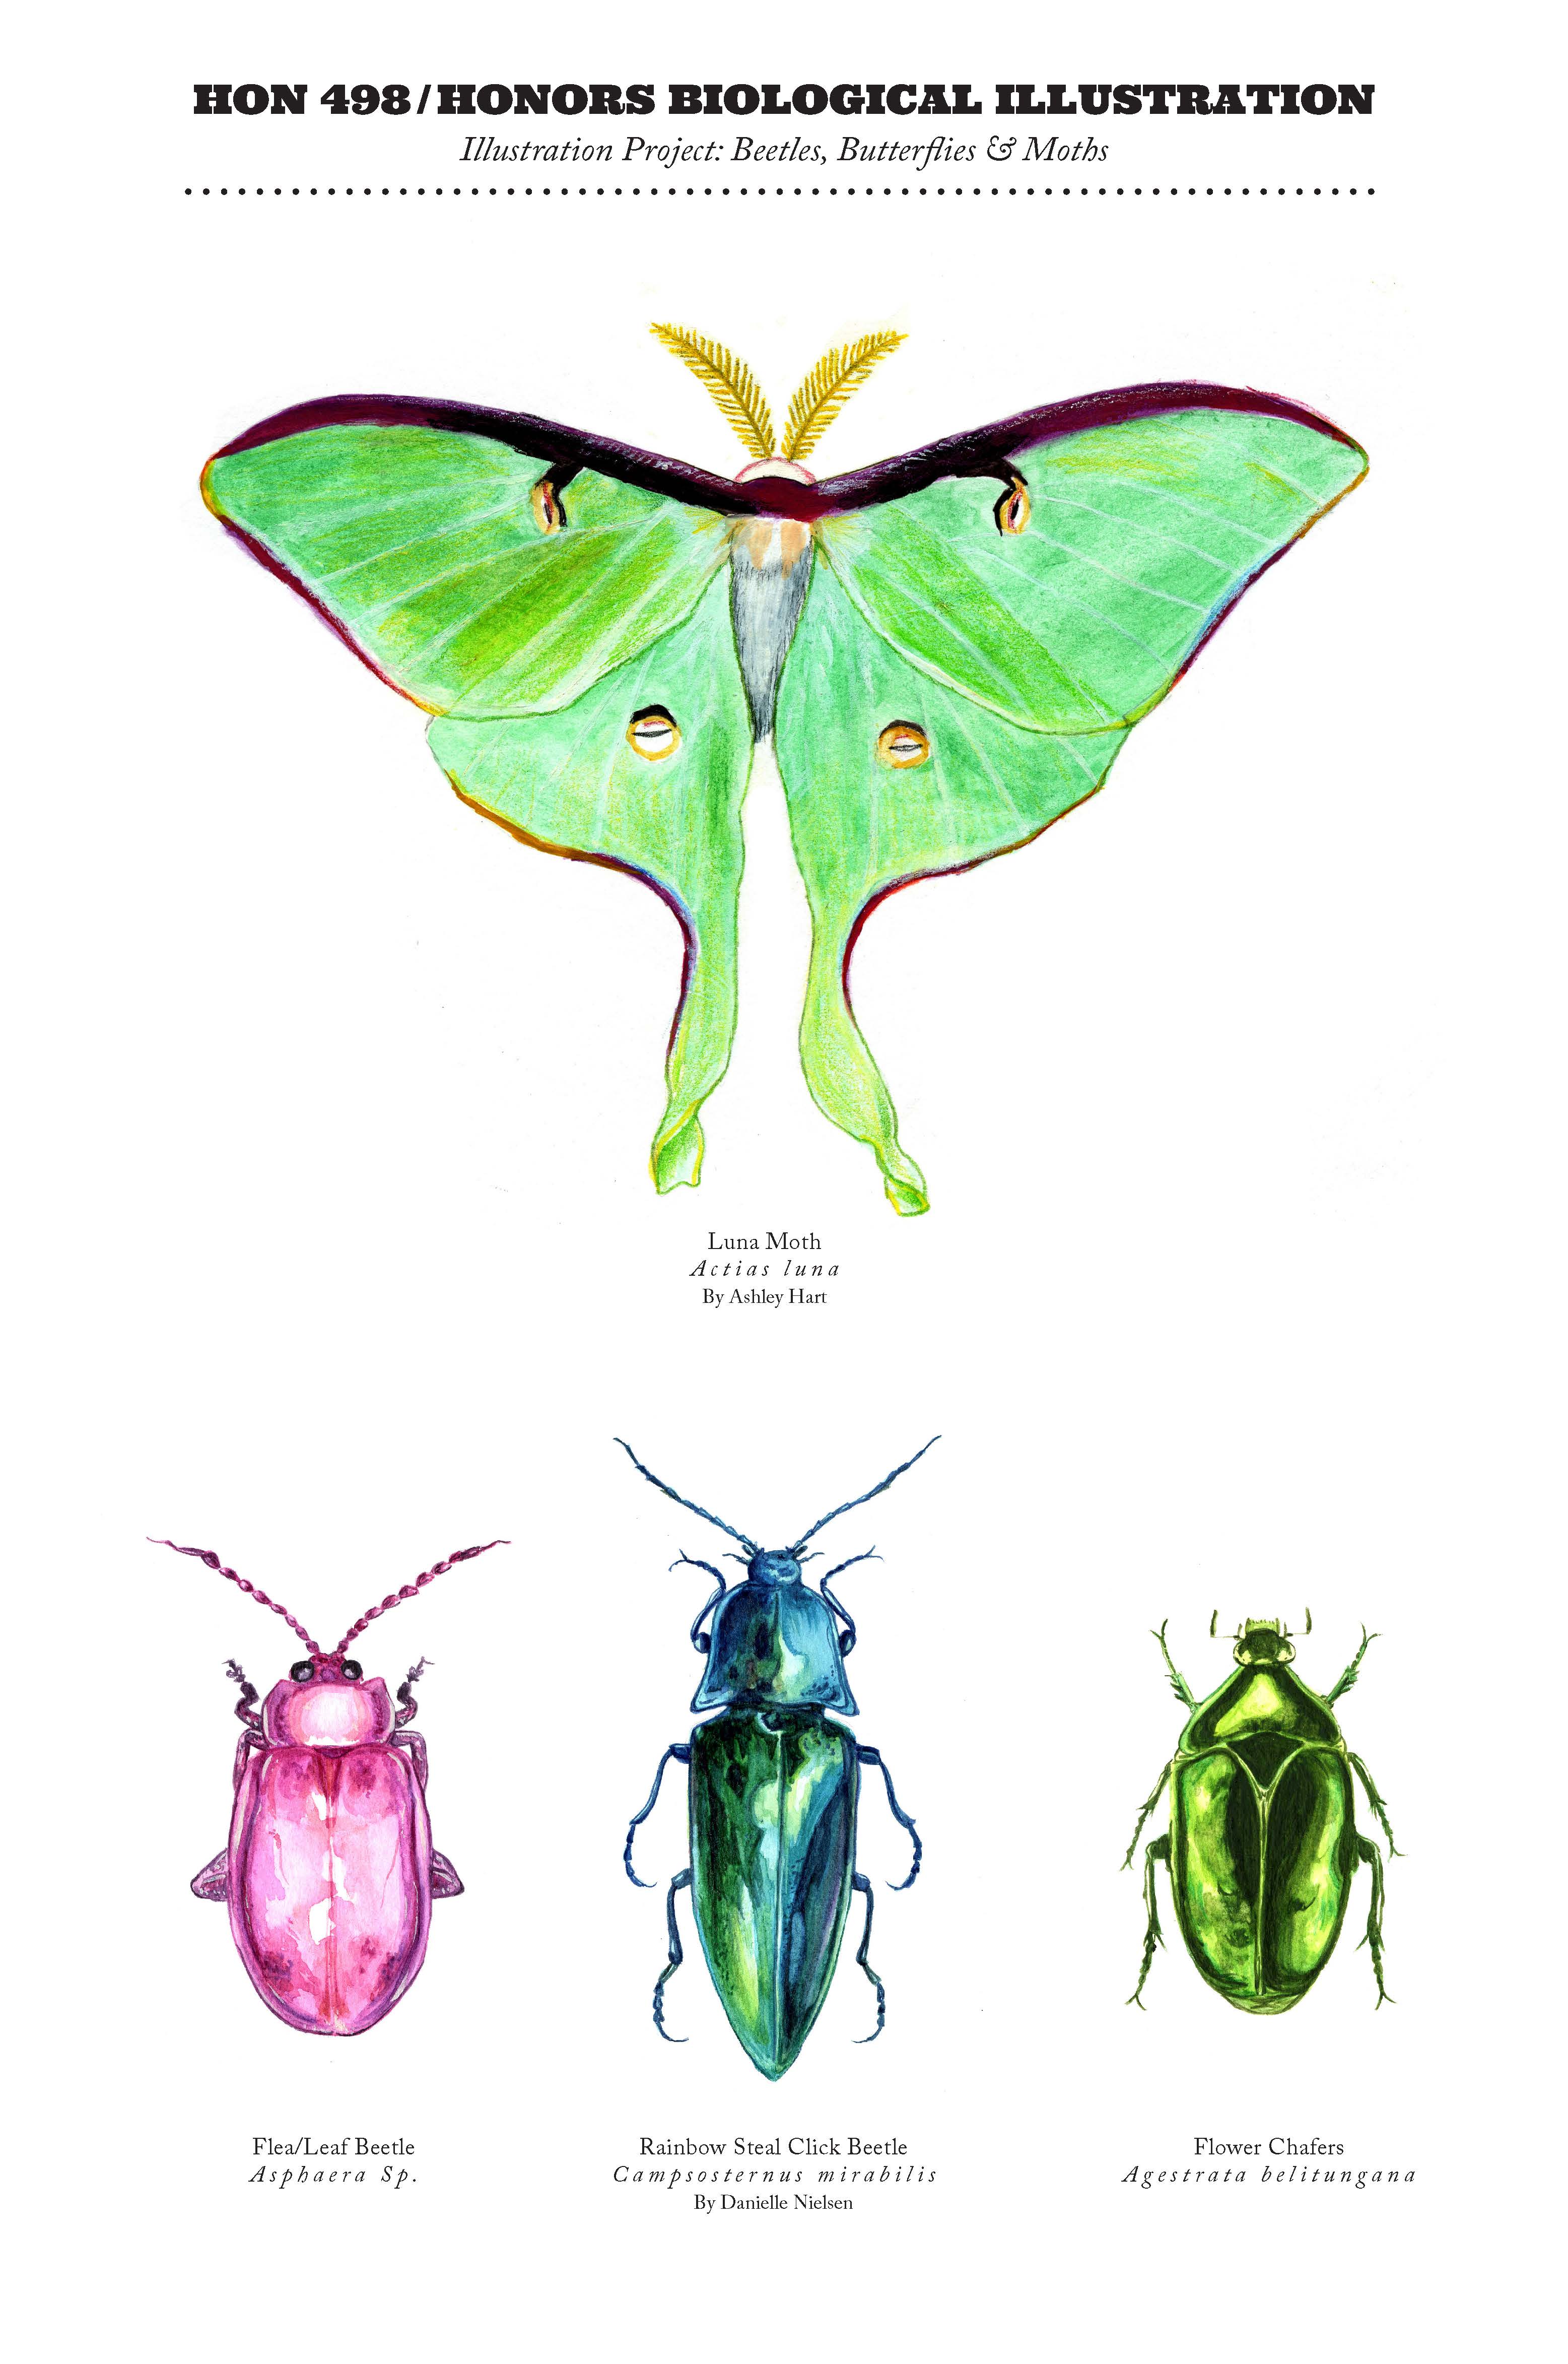 Drawings for Biological Illustration course. A green luna moth is at the top. On the bottom left is a pink beetle. A blue and green beetle is in the middle on the bottom, and there is a black and green beetle on the right.